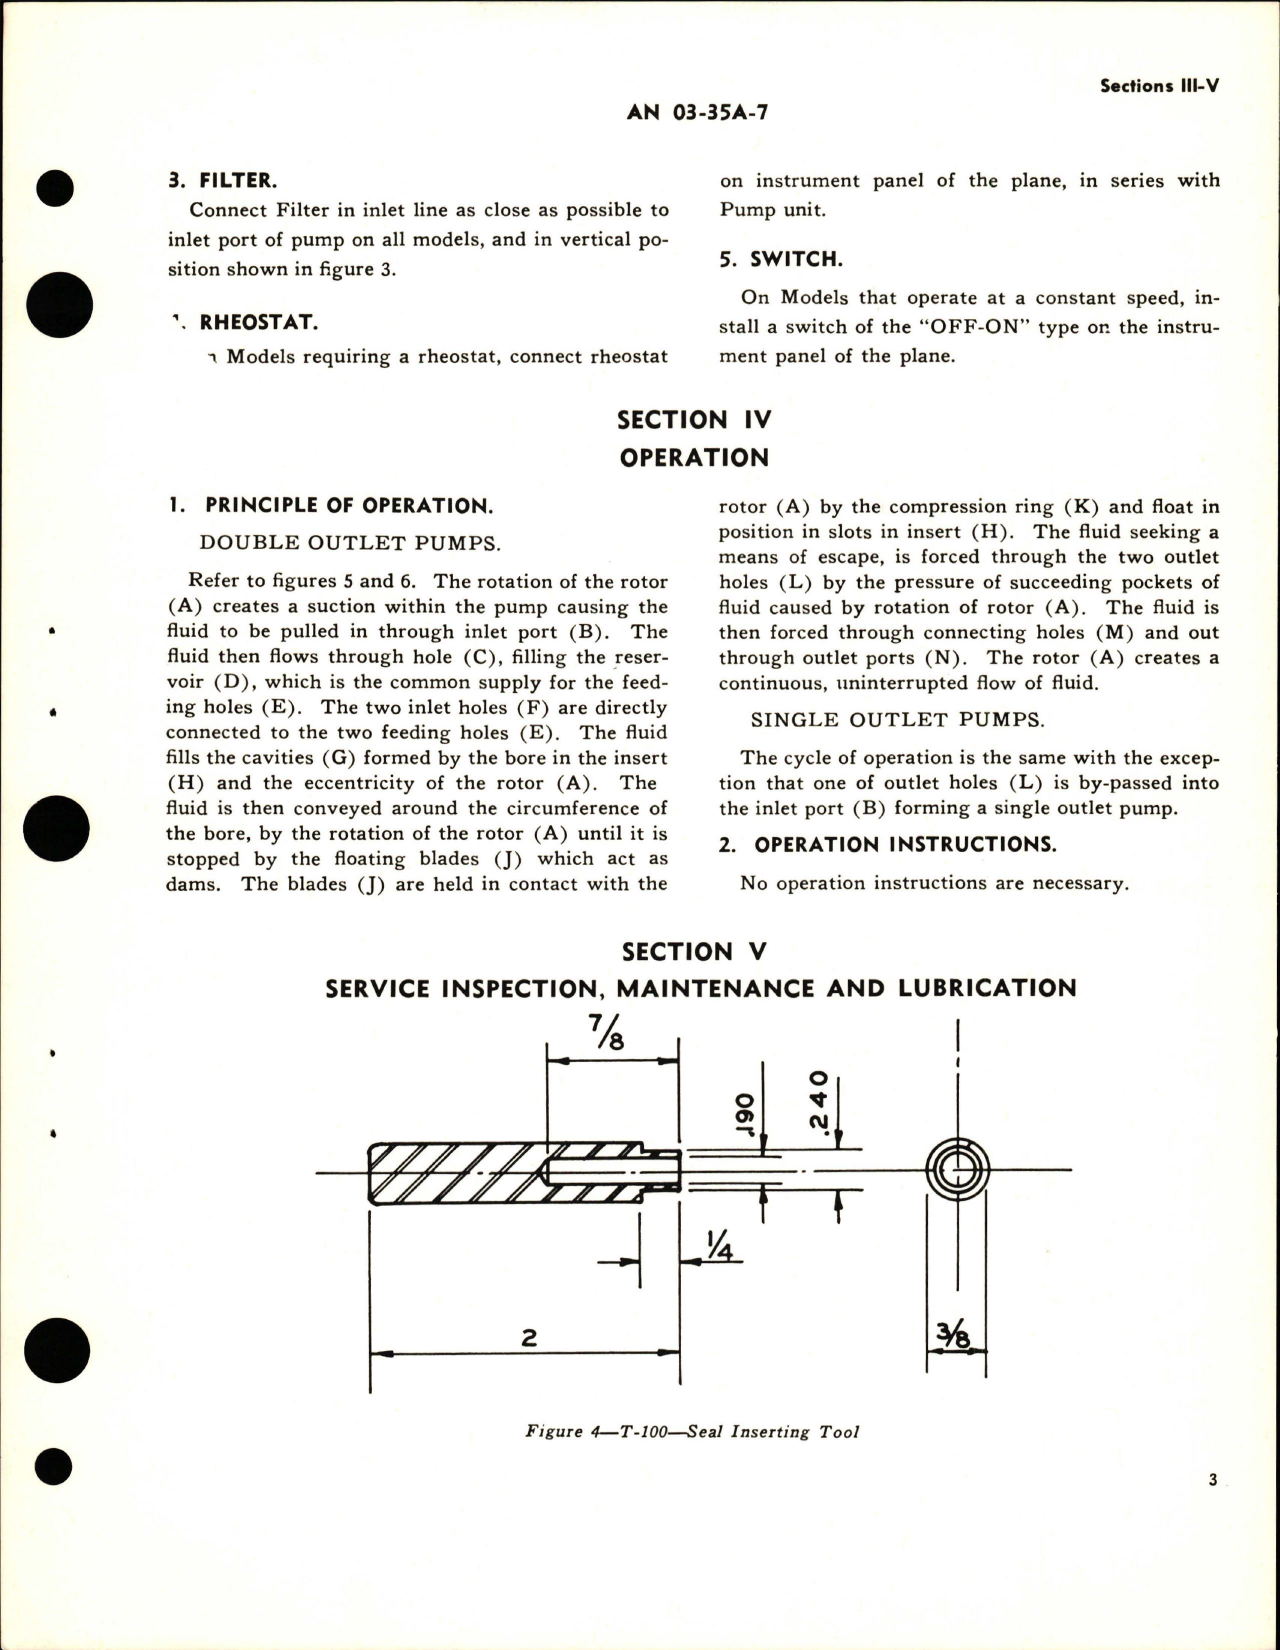 Sample page 7 from AirCorps Library document: Operation, Service and Overhaul Instructions with Parts Catalog for Anti-Icer Pumps - Double Outlet Models 